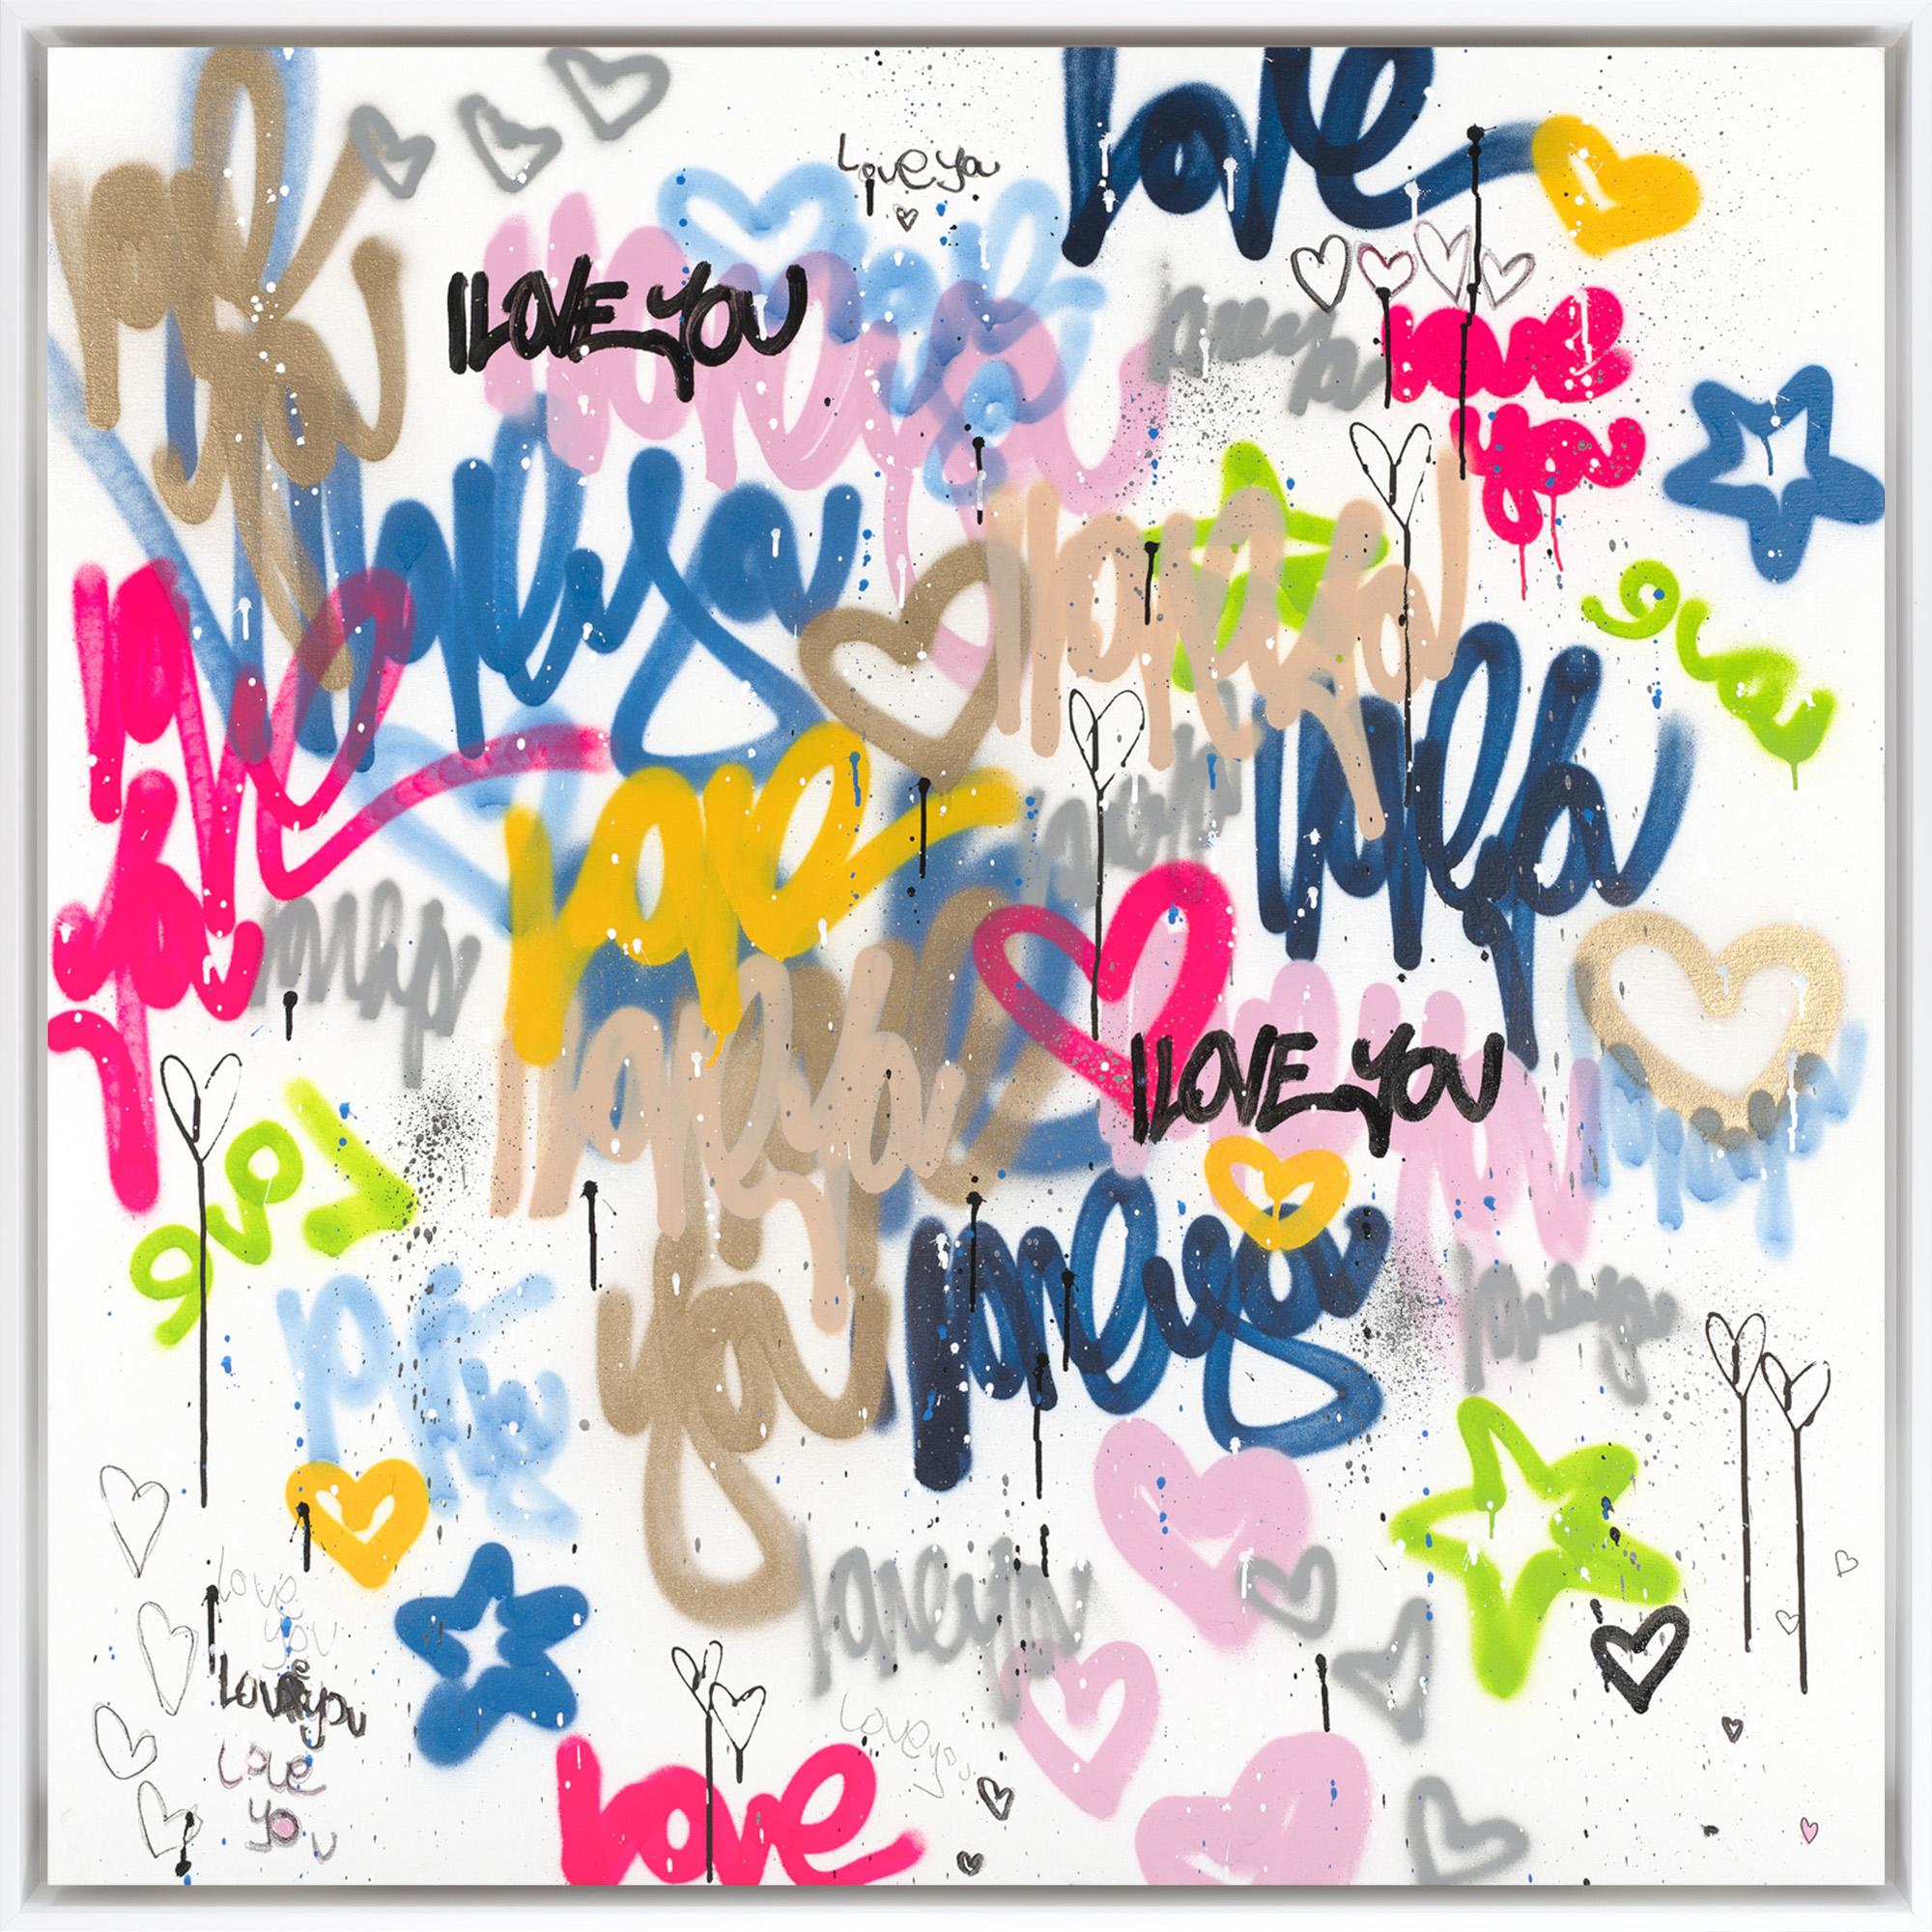 Amber Goldhammer Abstract Painting - "Warm and Fuzzy Love" Abstract Colorful Graffiti Style Painting